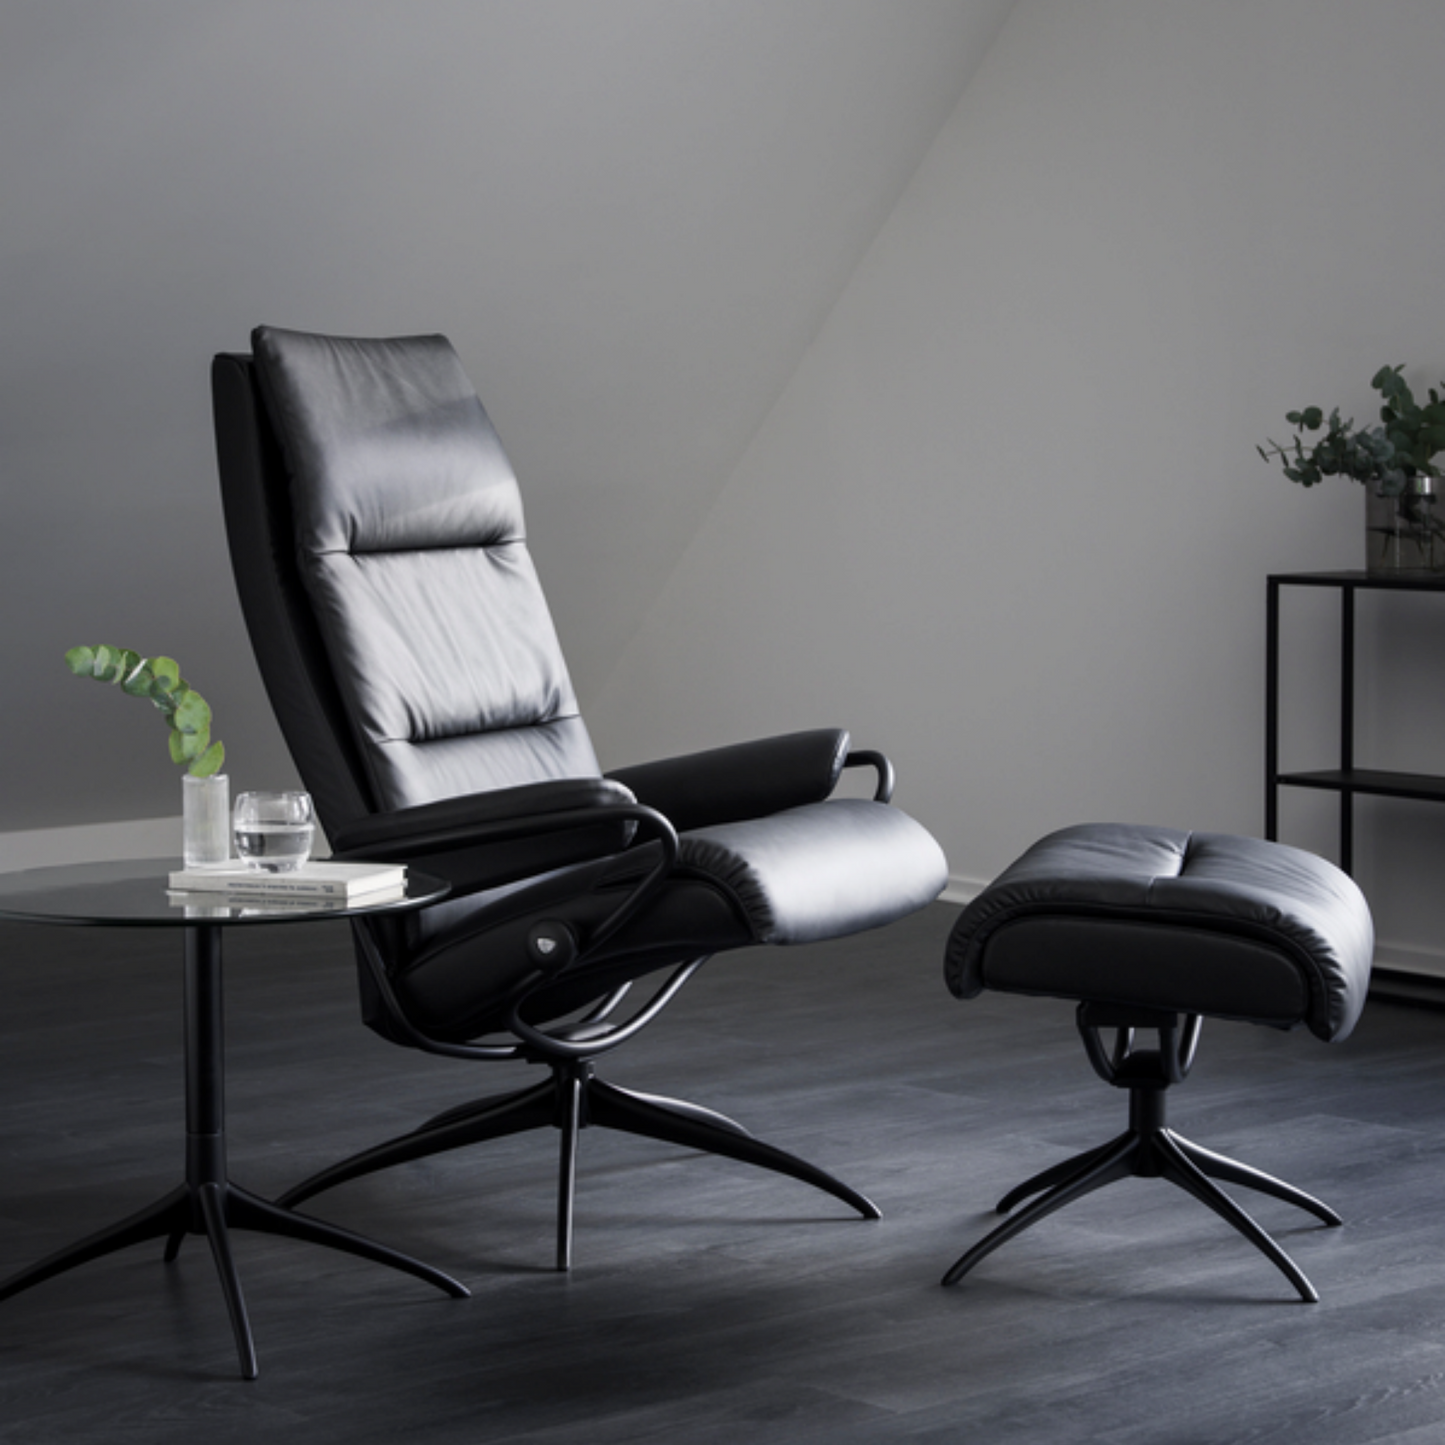 Tokyo High Back Recliner by Stressless